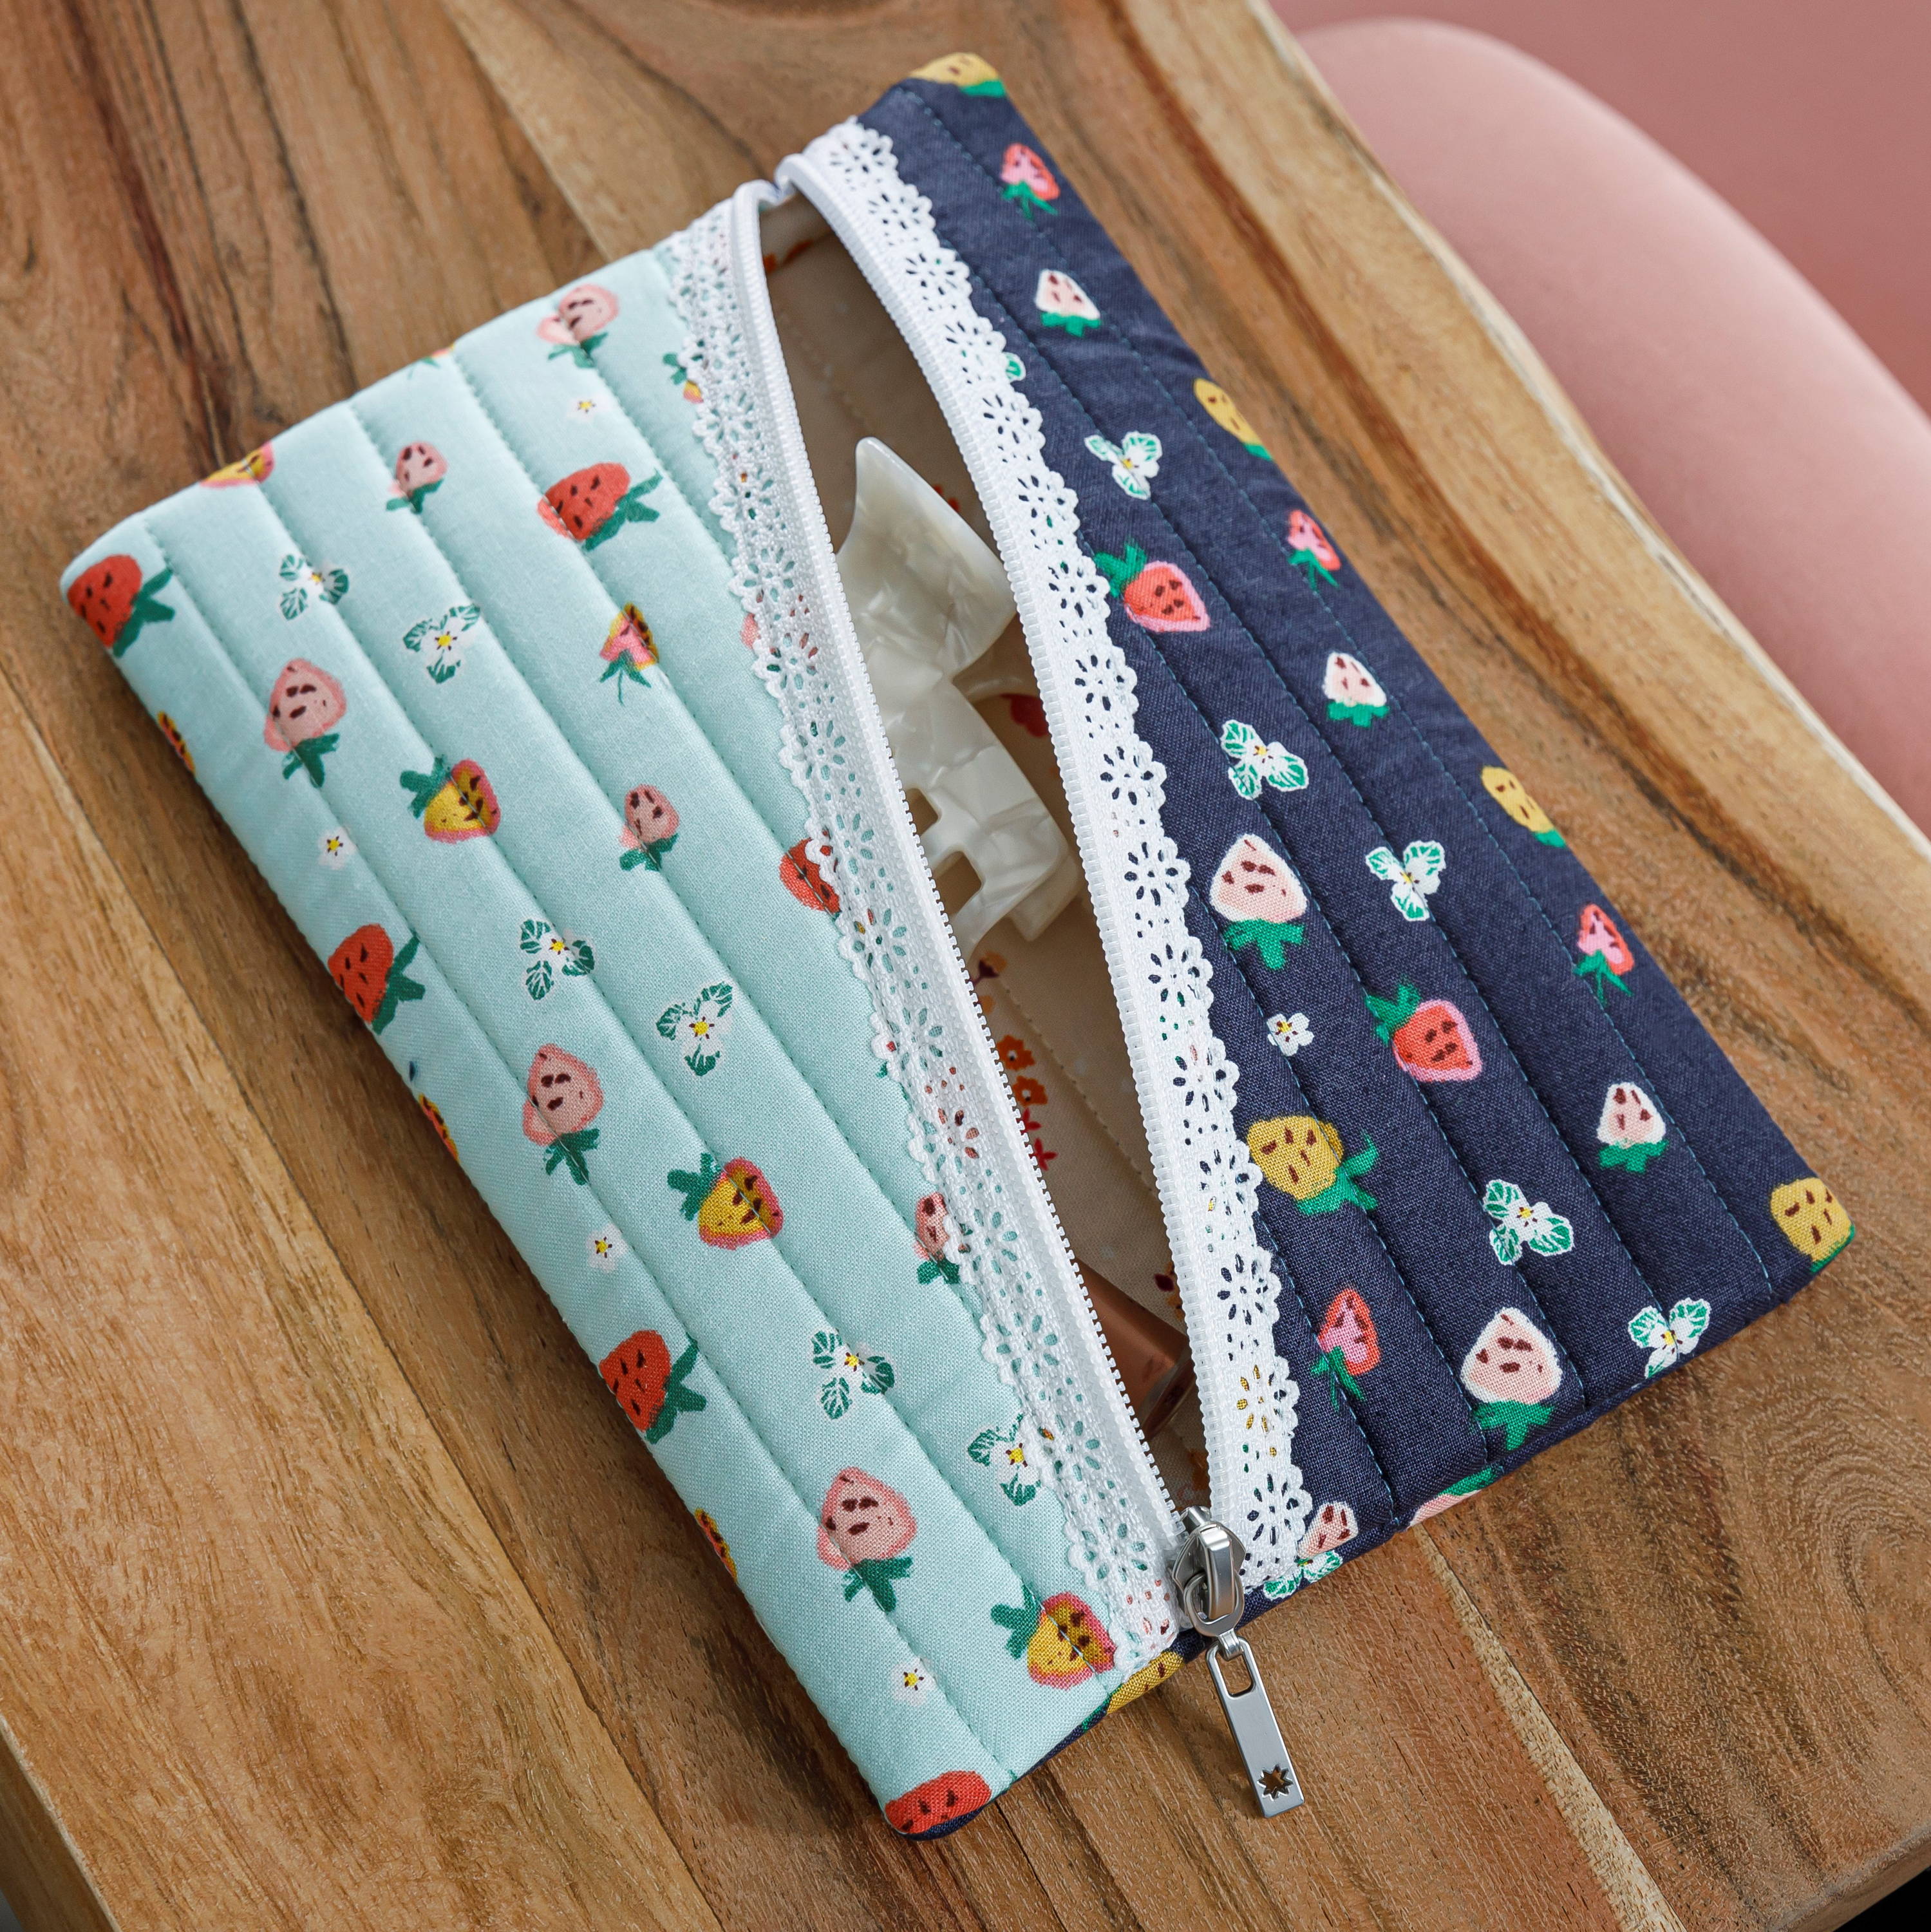 Store in style with a two toned zipper pouch sewing project